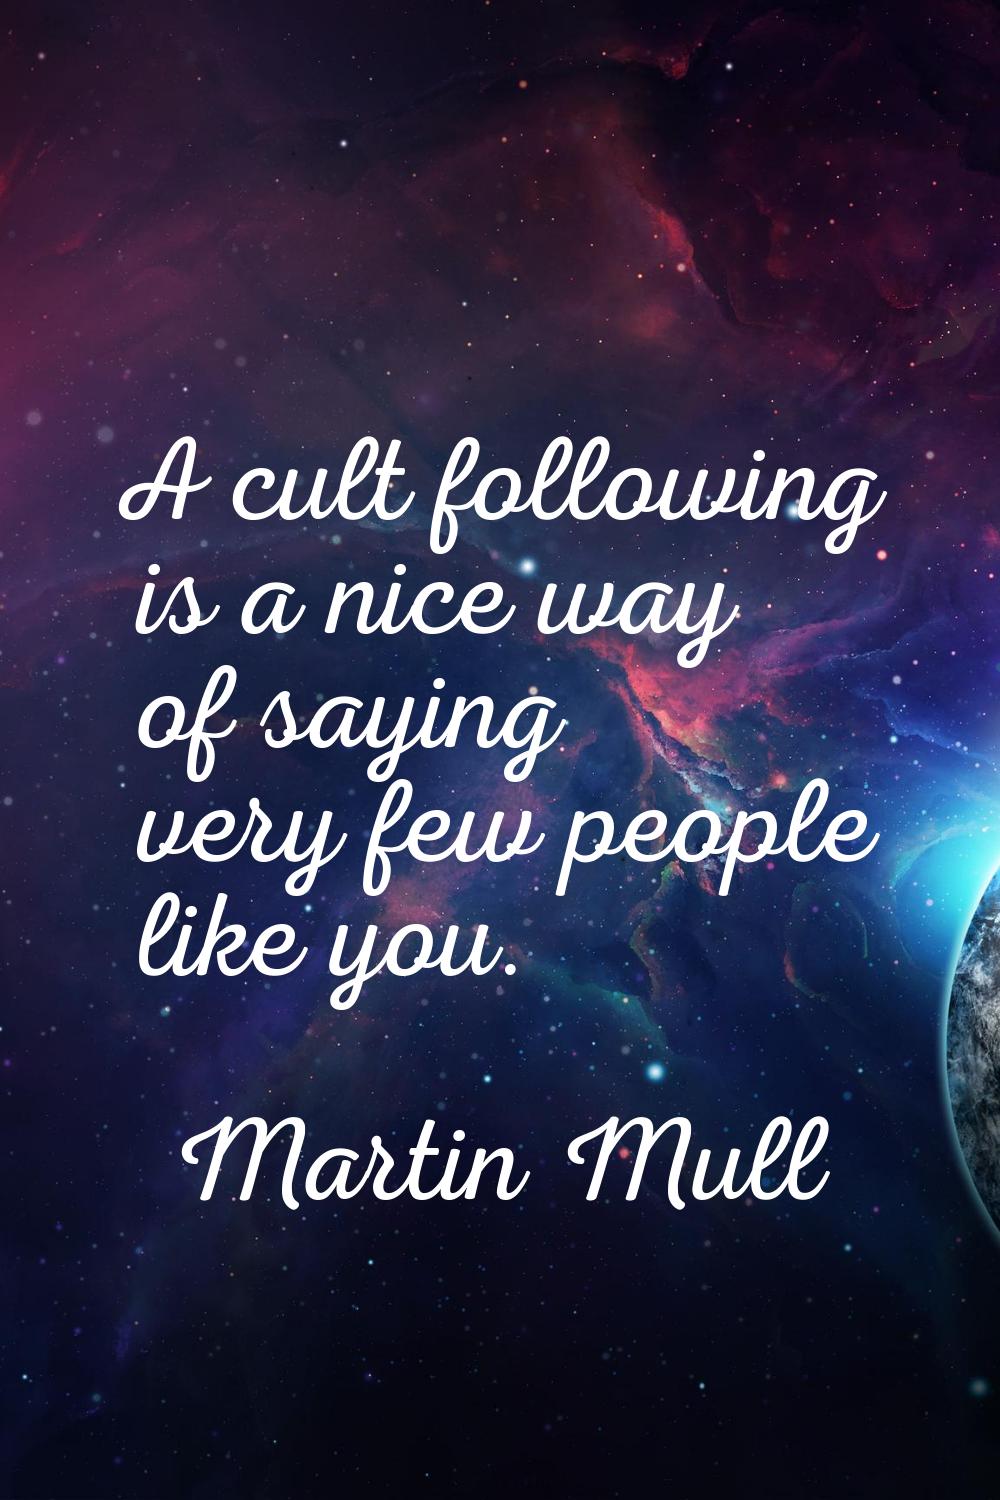 A cult following is a nice way of saying very few people like you.